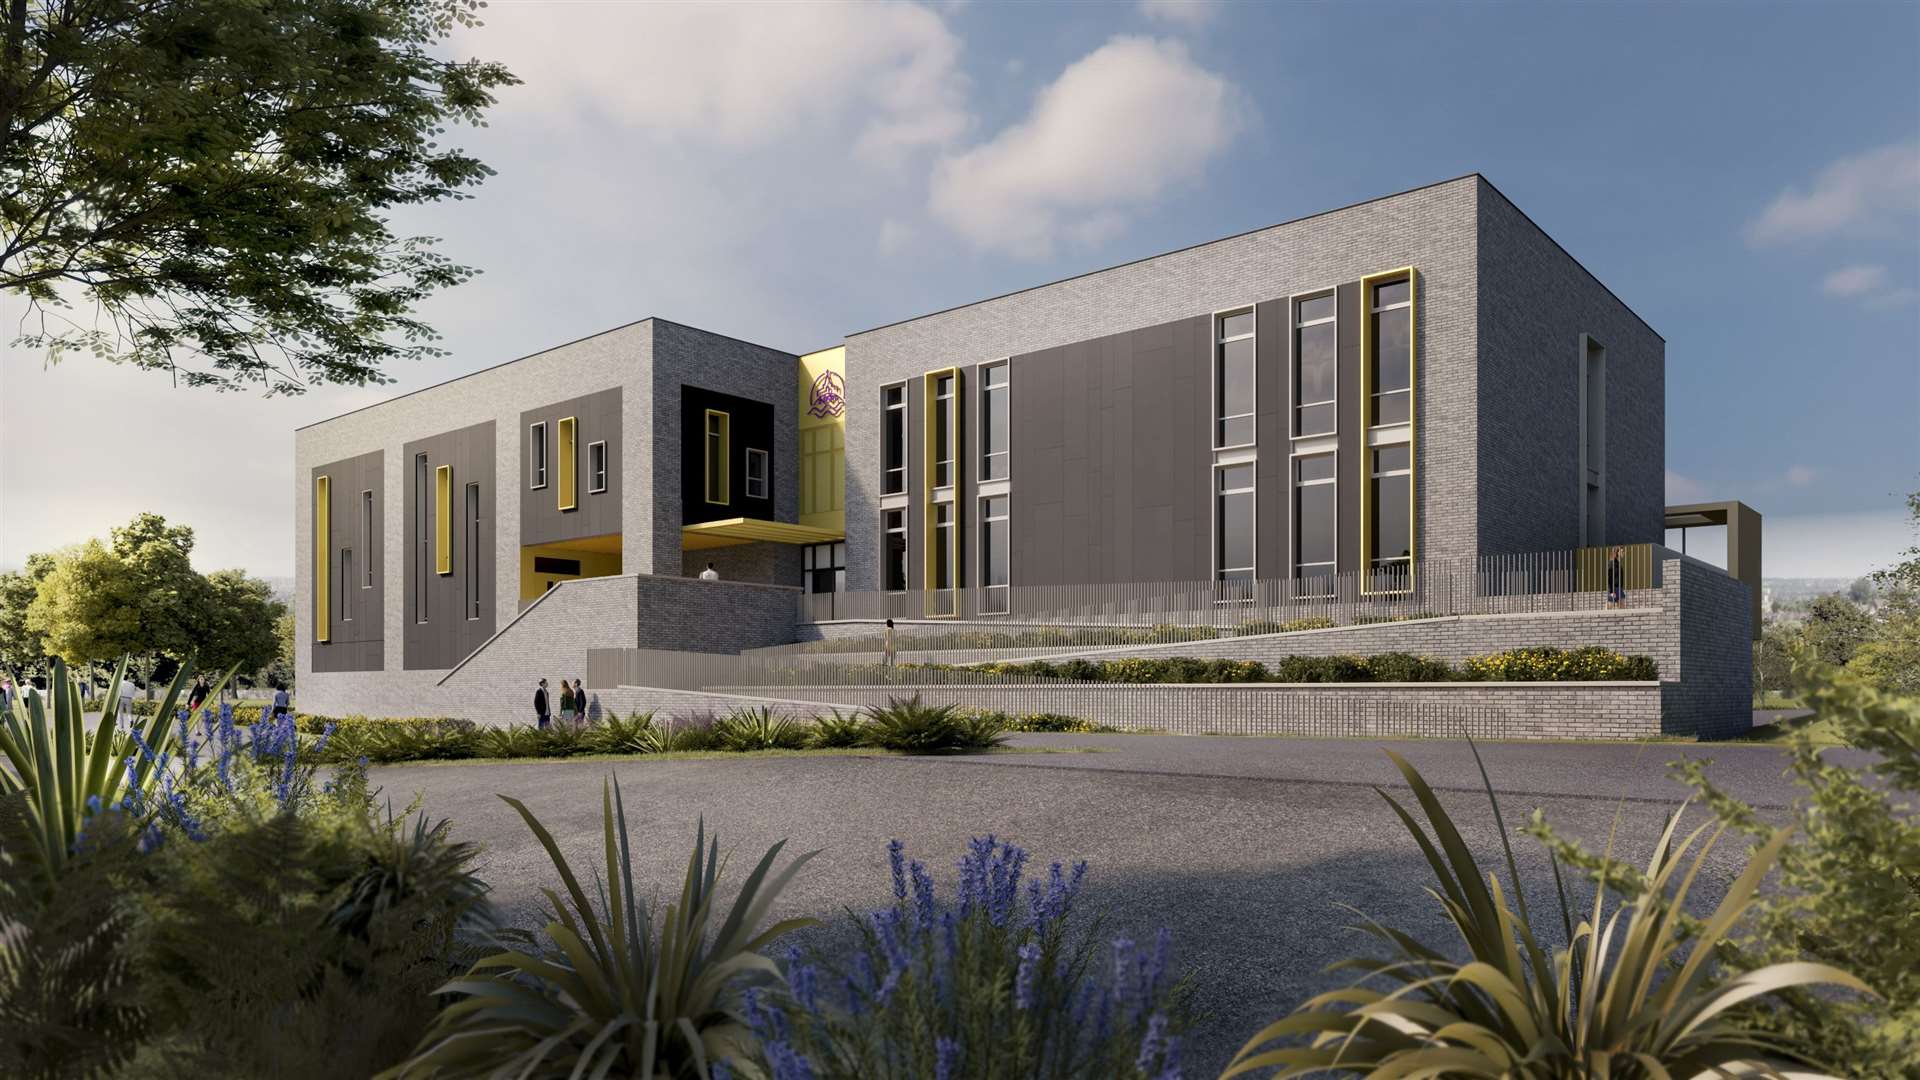 How the new school will look